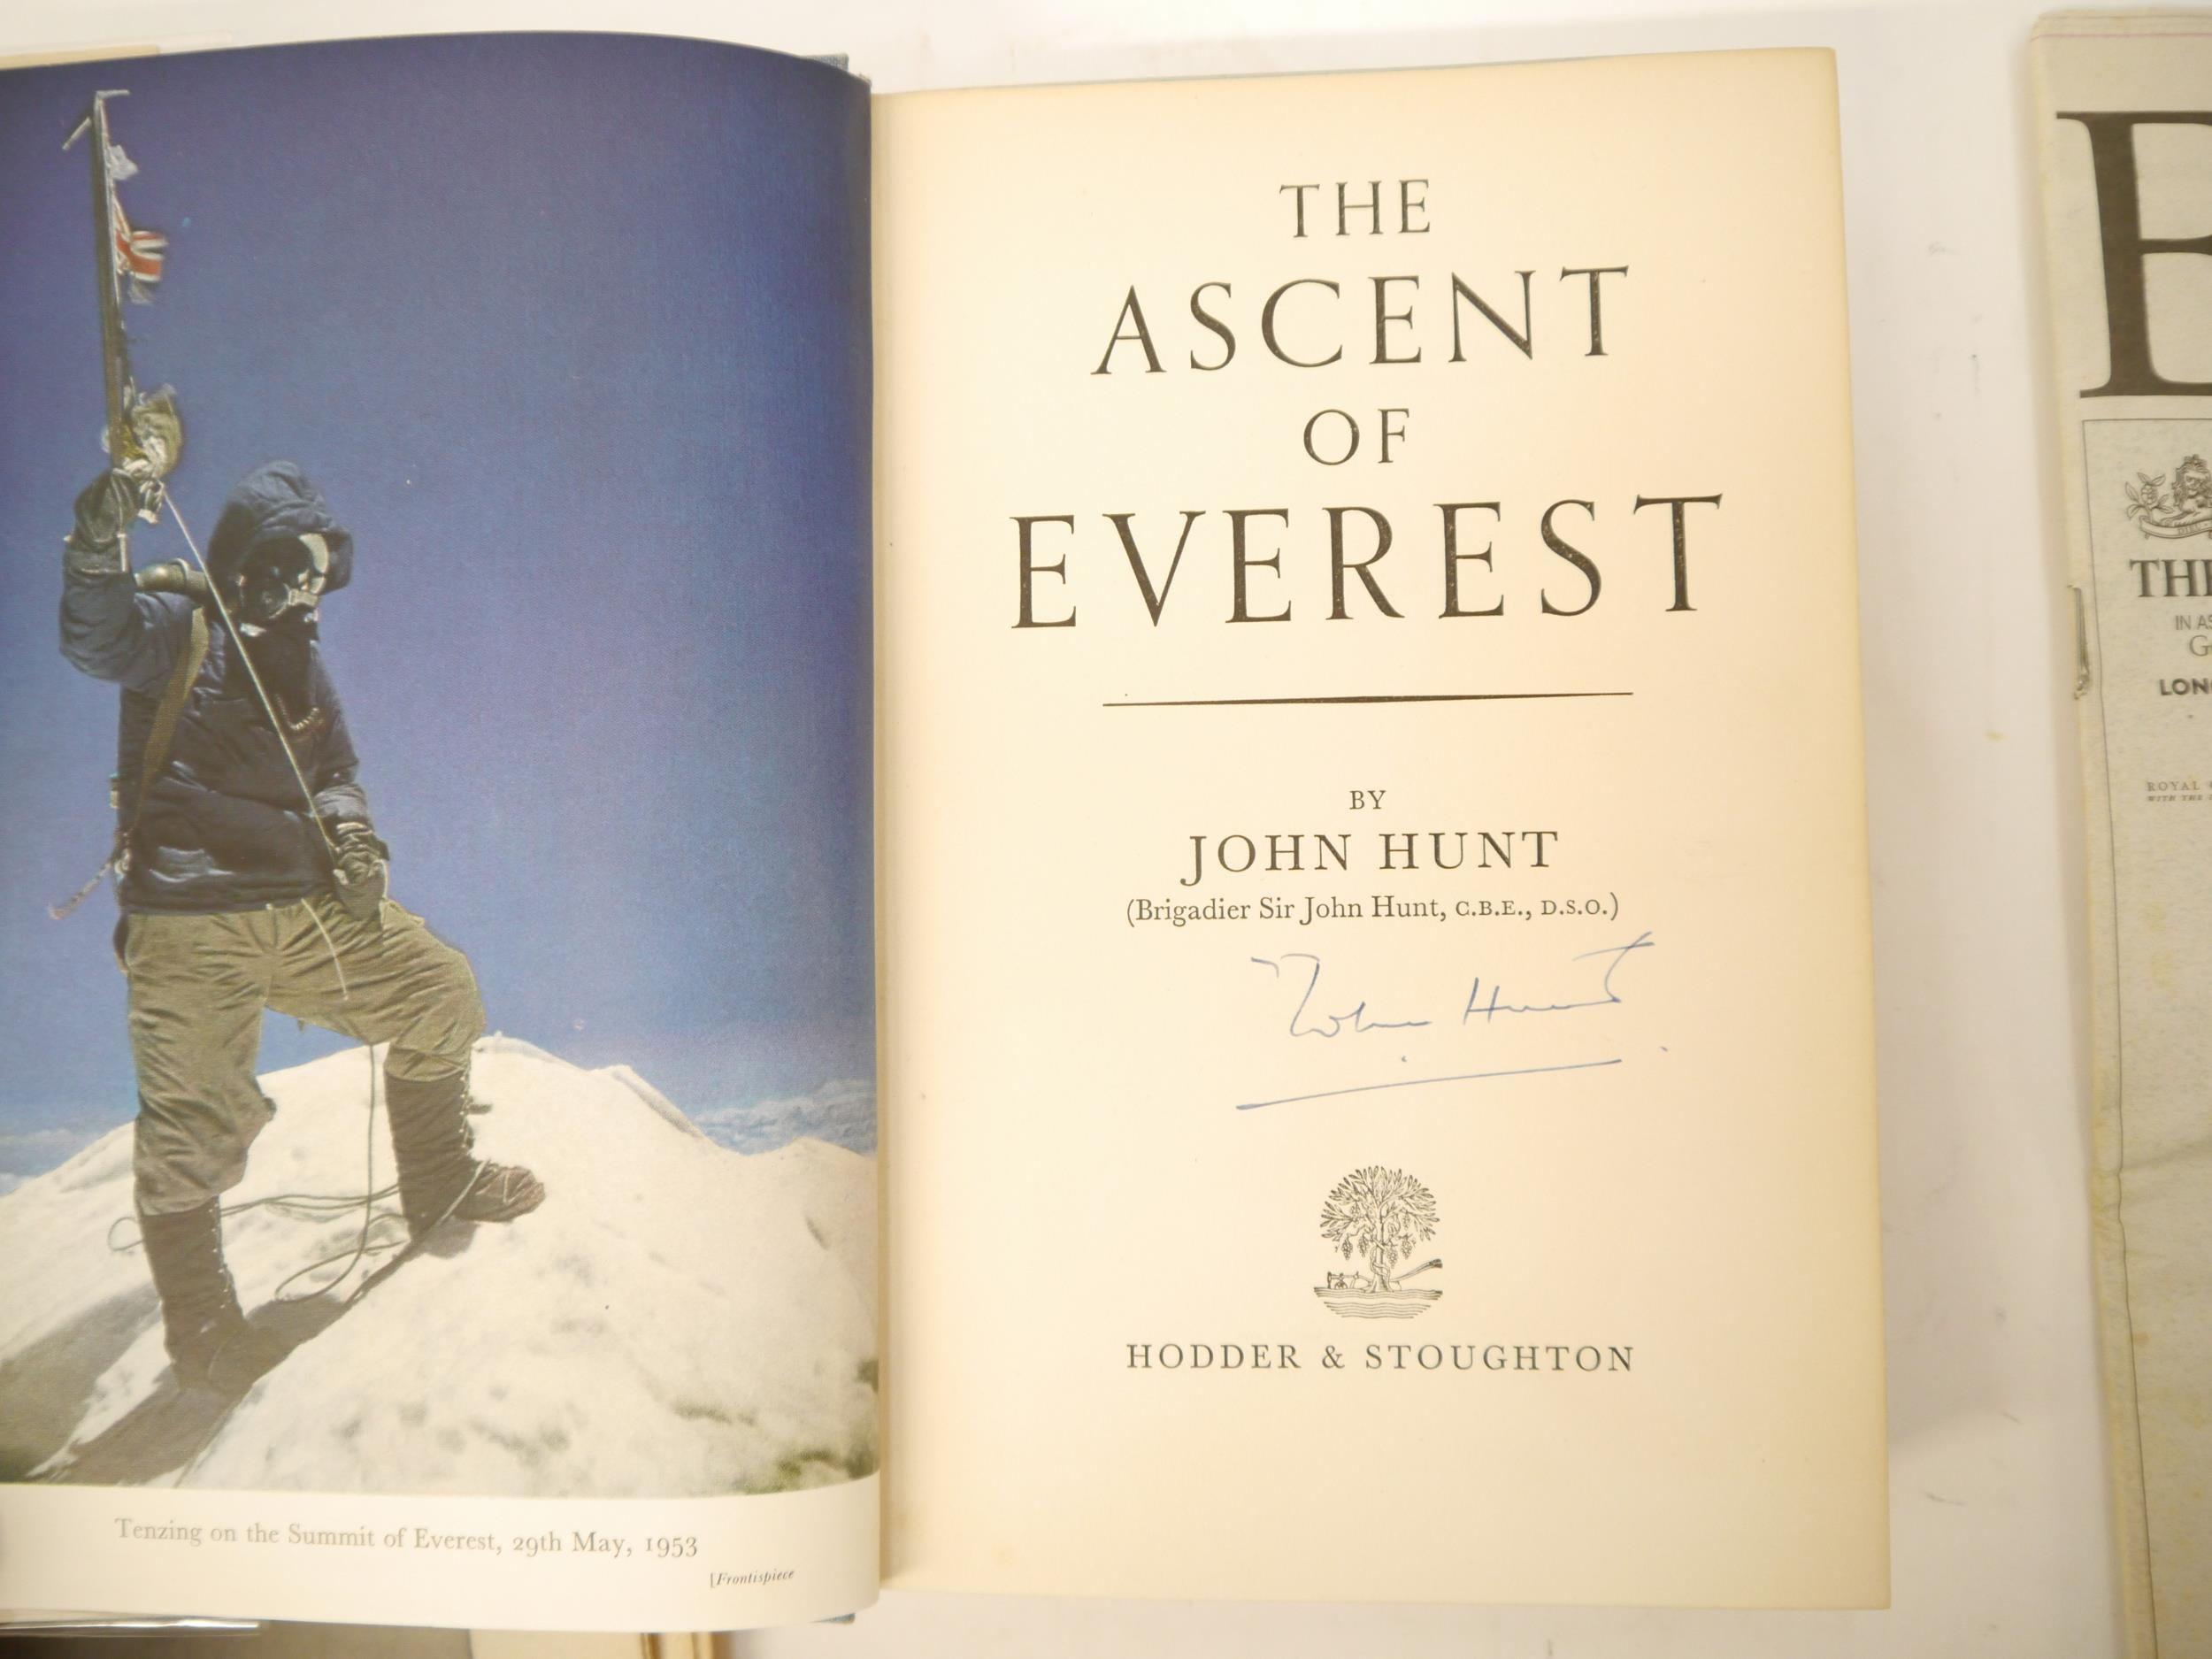 John Hunt: 'The Ascent of Everest', London, Hodder & Stoughton, 1953, 1st edition, signed by the - Image 2 of 4